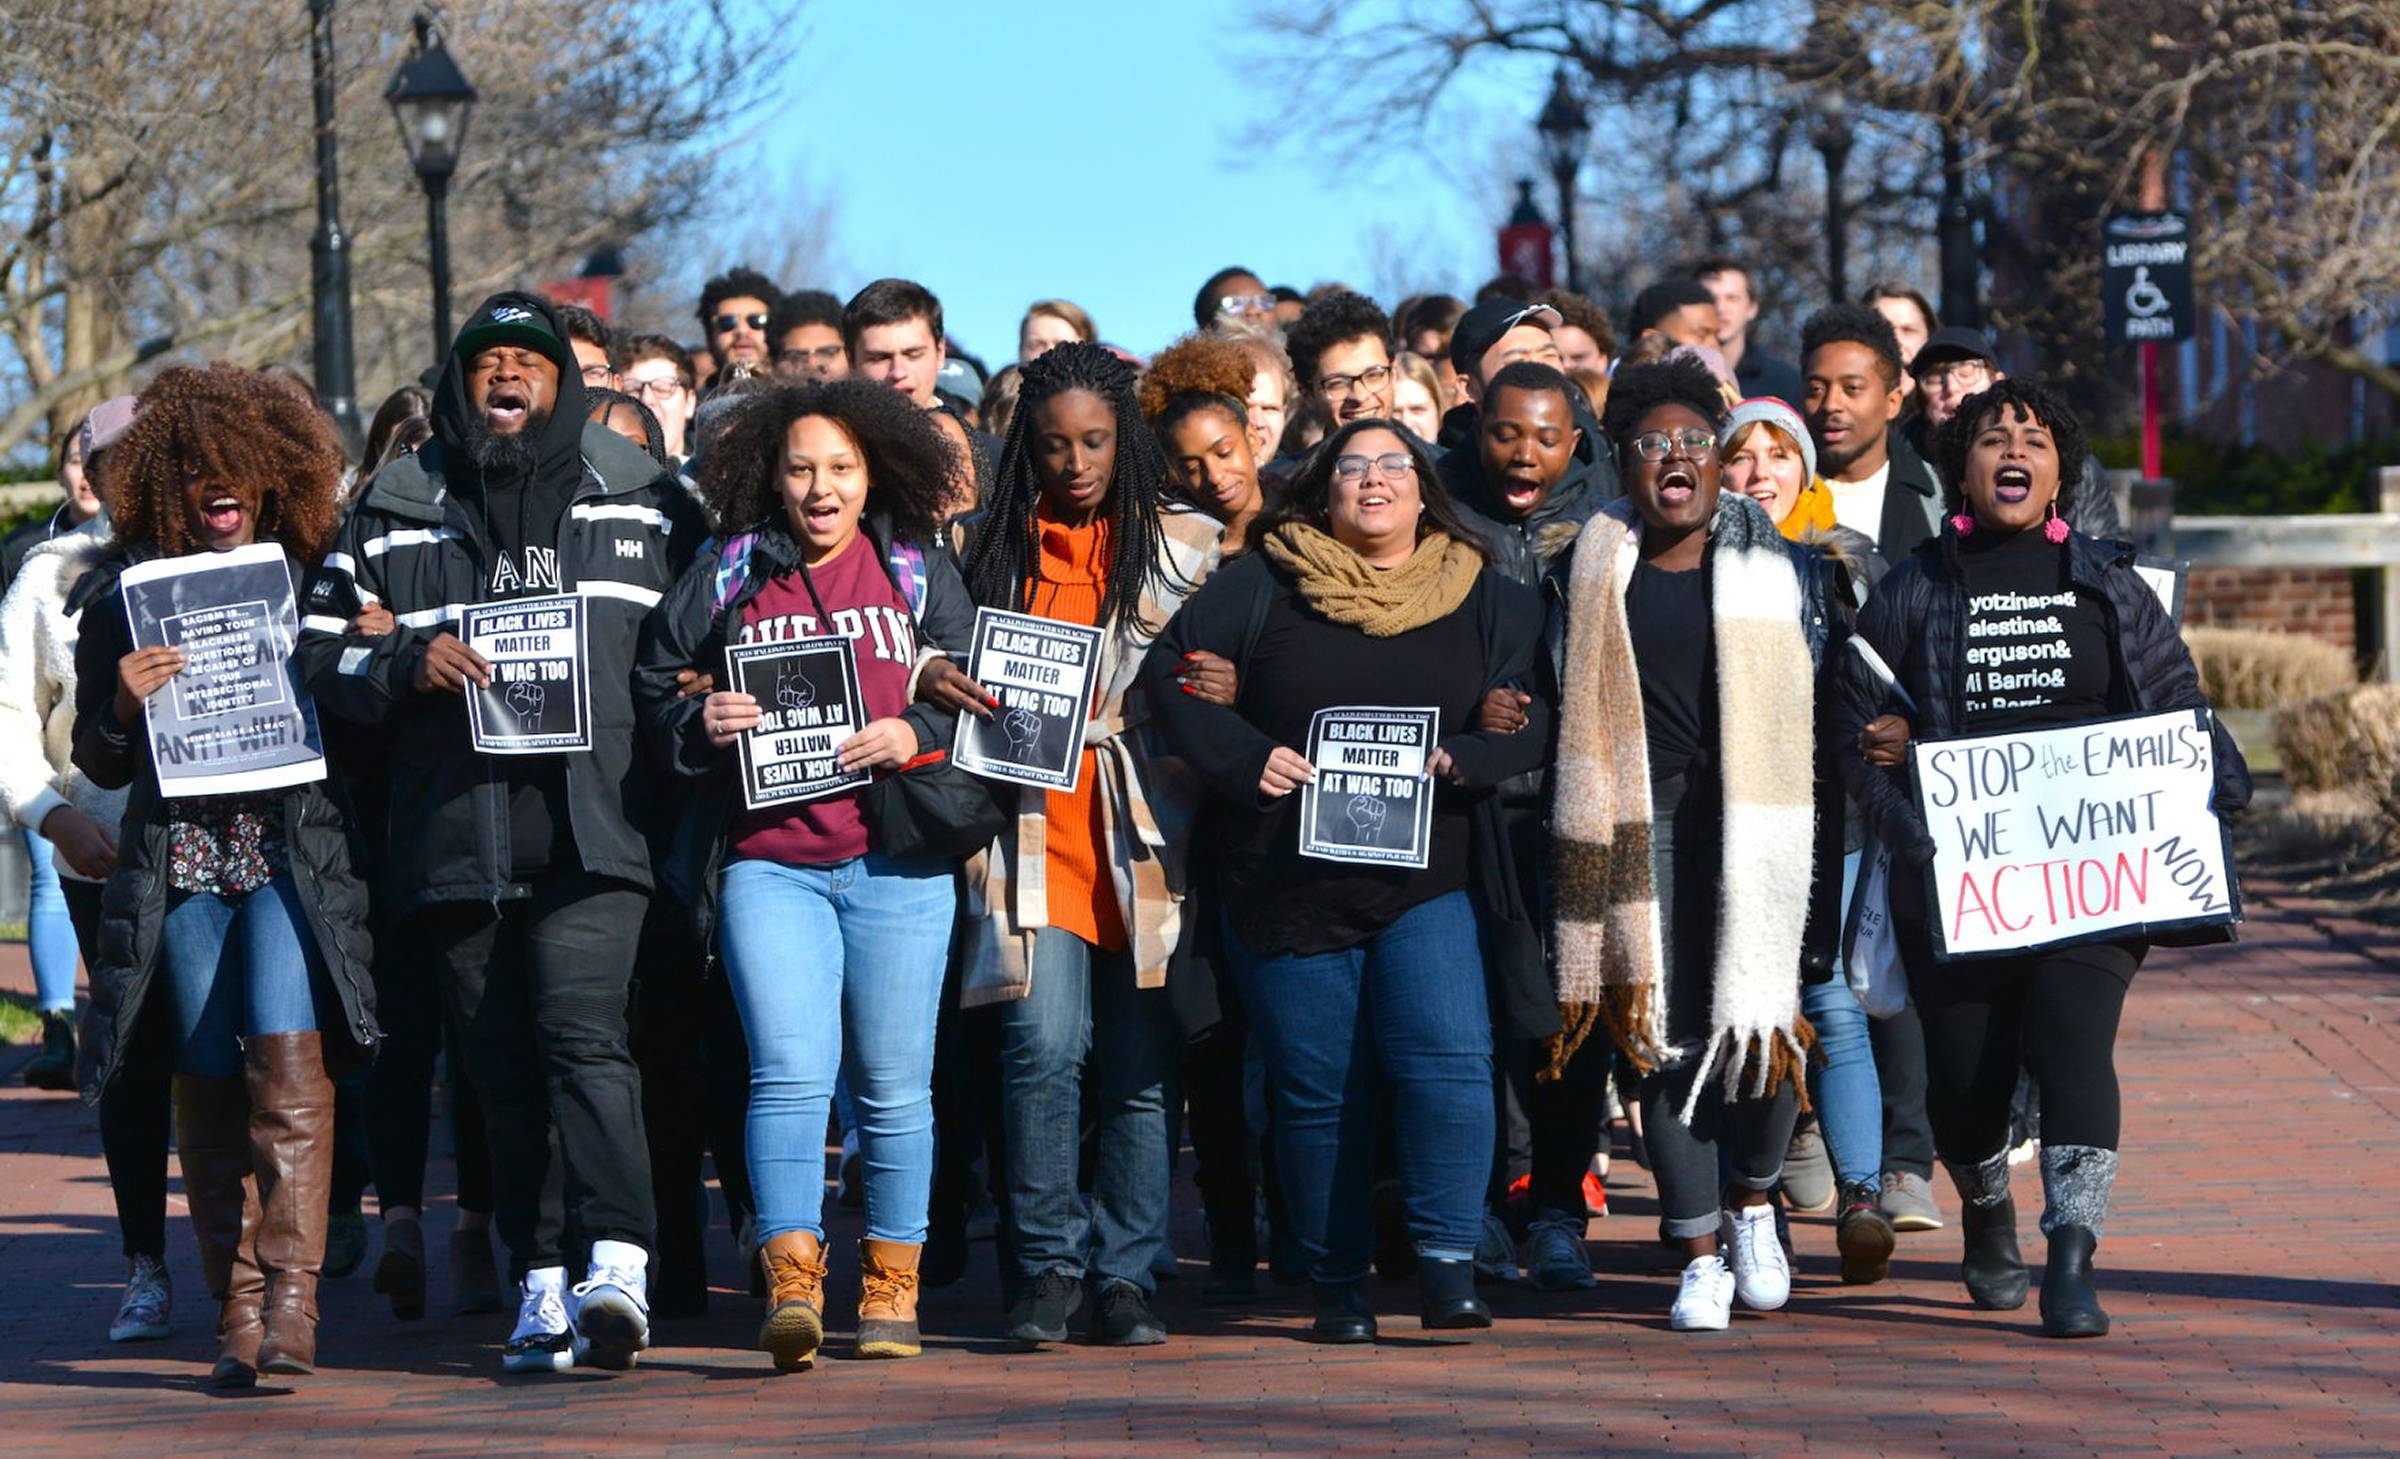 Students marching for racial justice on campus